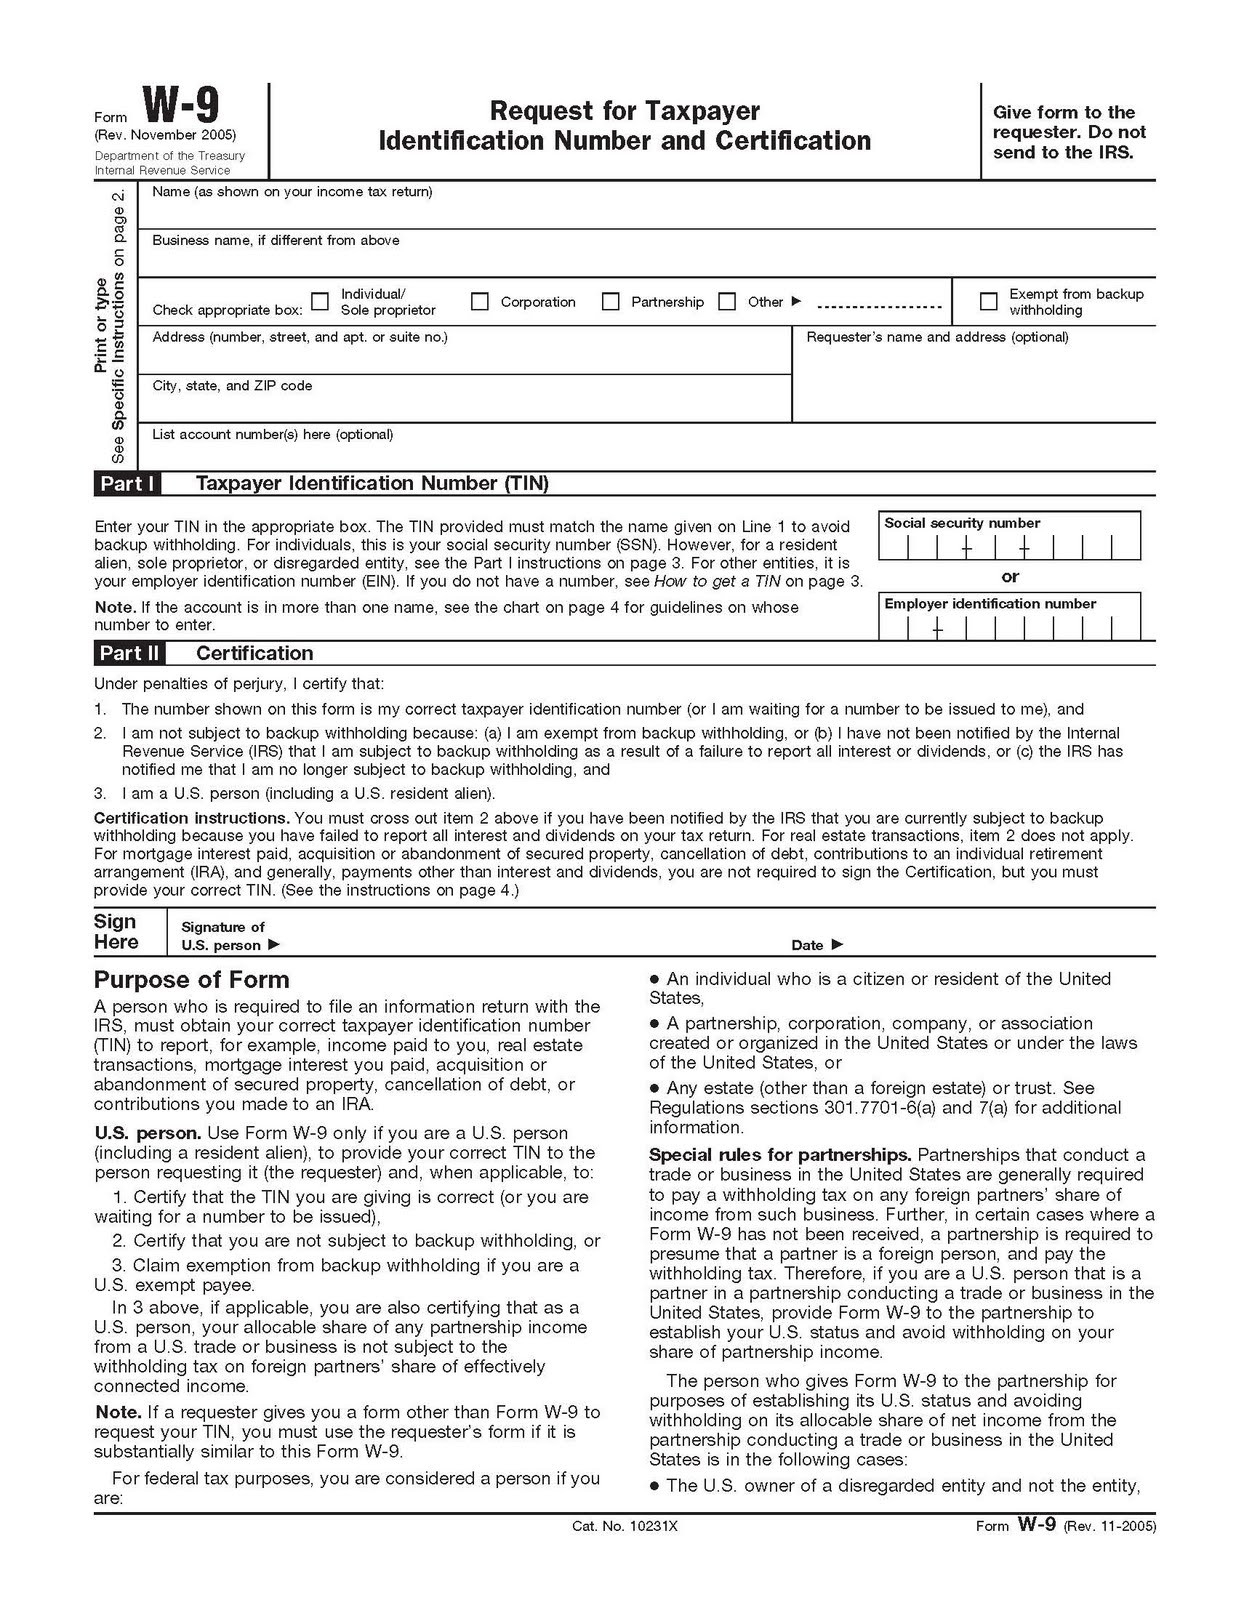 W9 Tax Exempt Form Is A And The Same W 9 Sales Vs Irs-Order Blank W-9 Forms